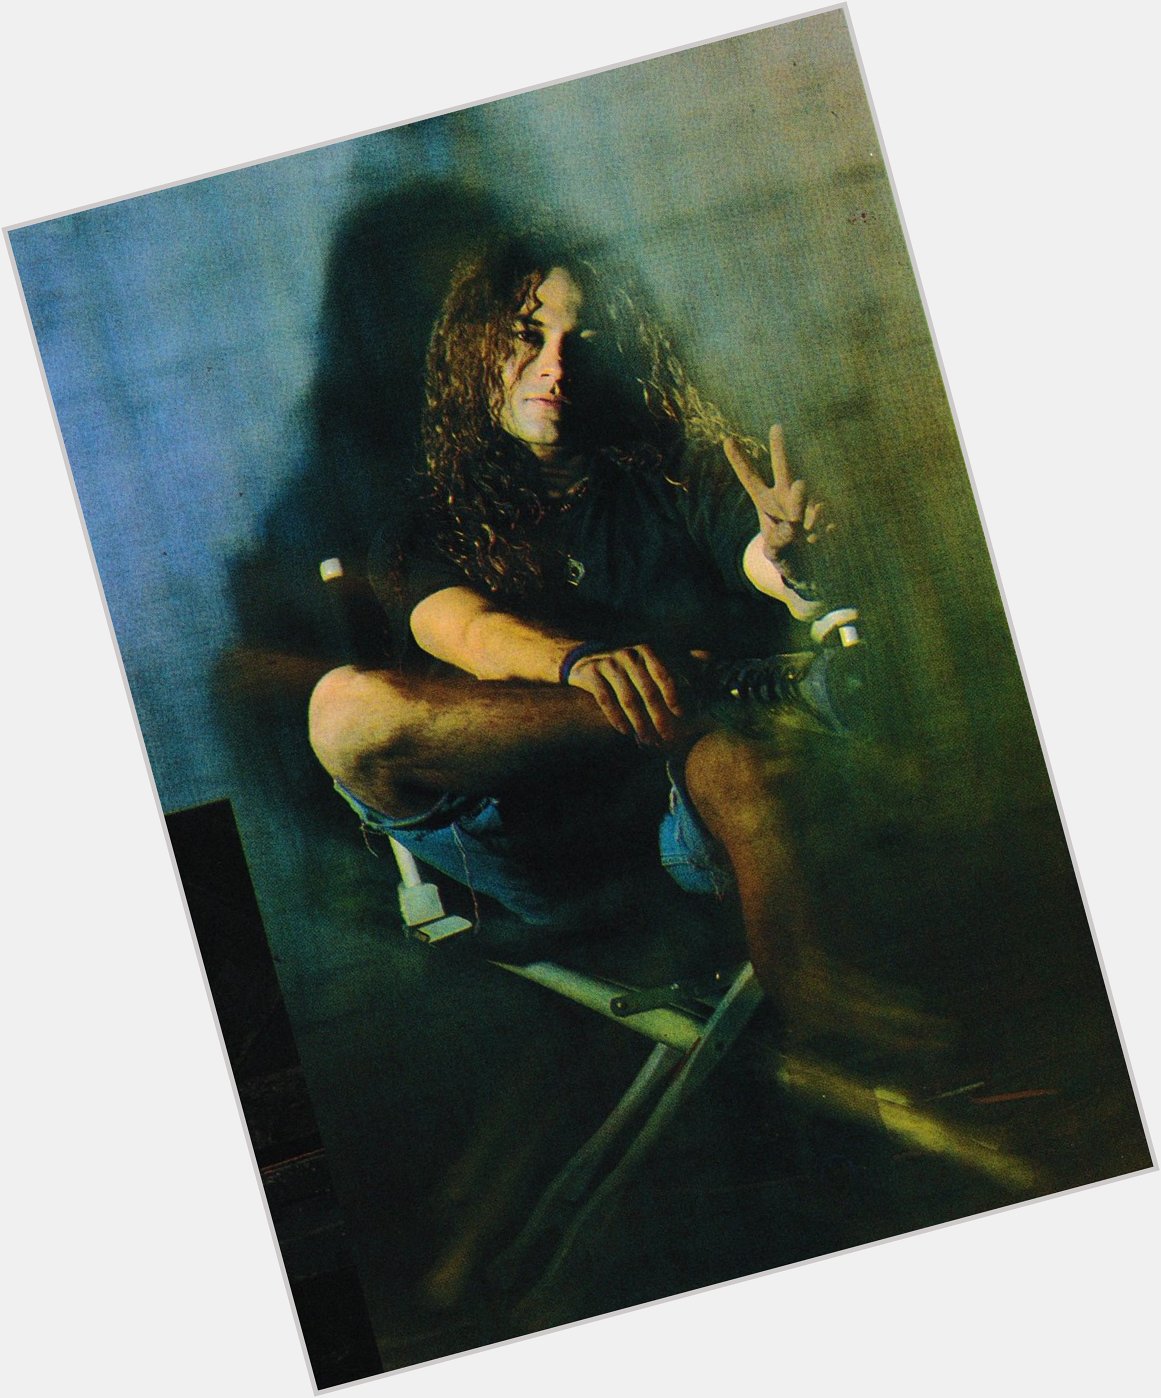   Happy birthday to Mike Starr. You were such a beautiful soul  